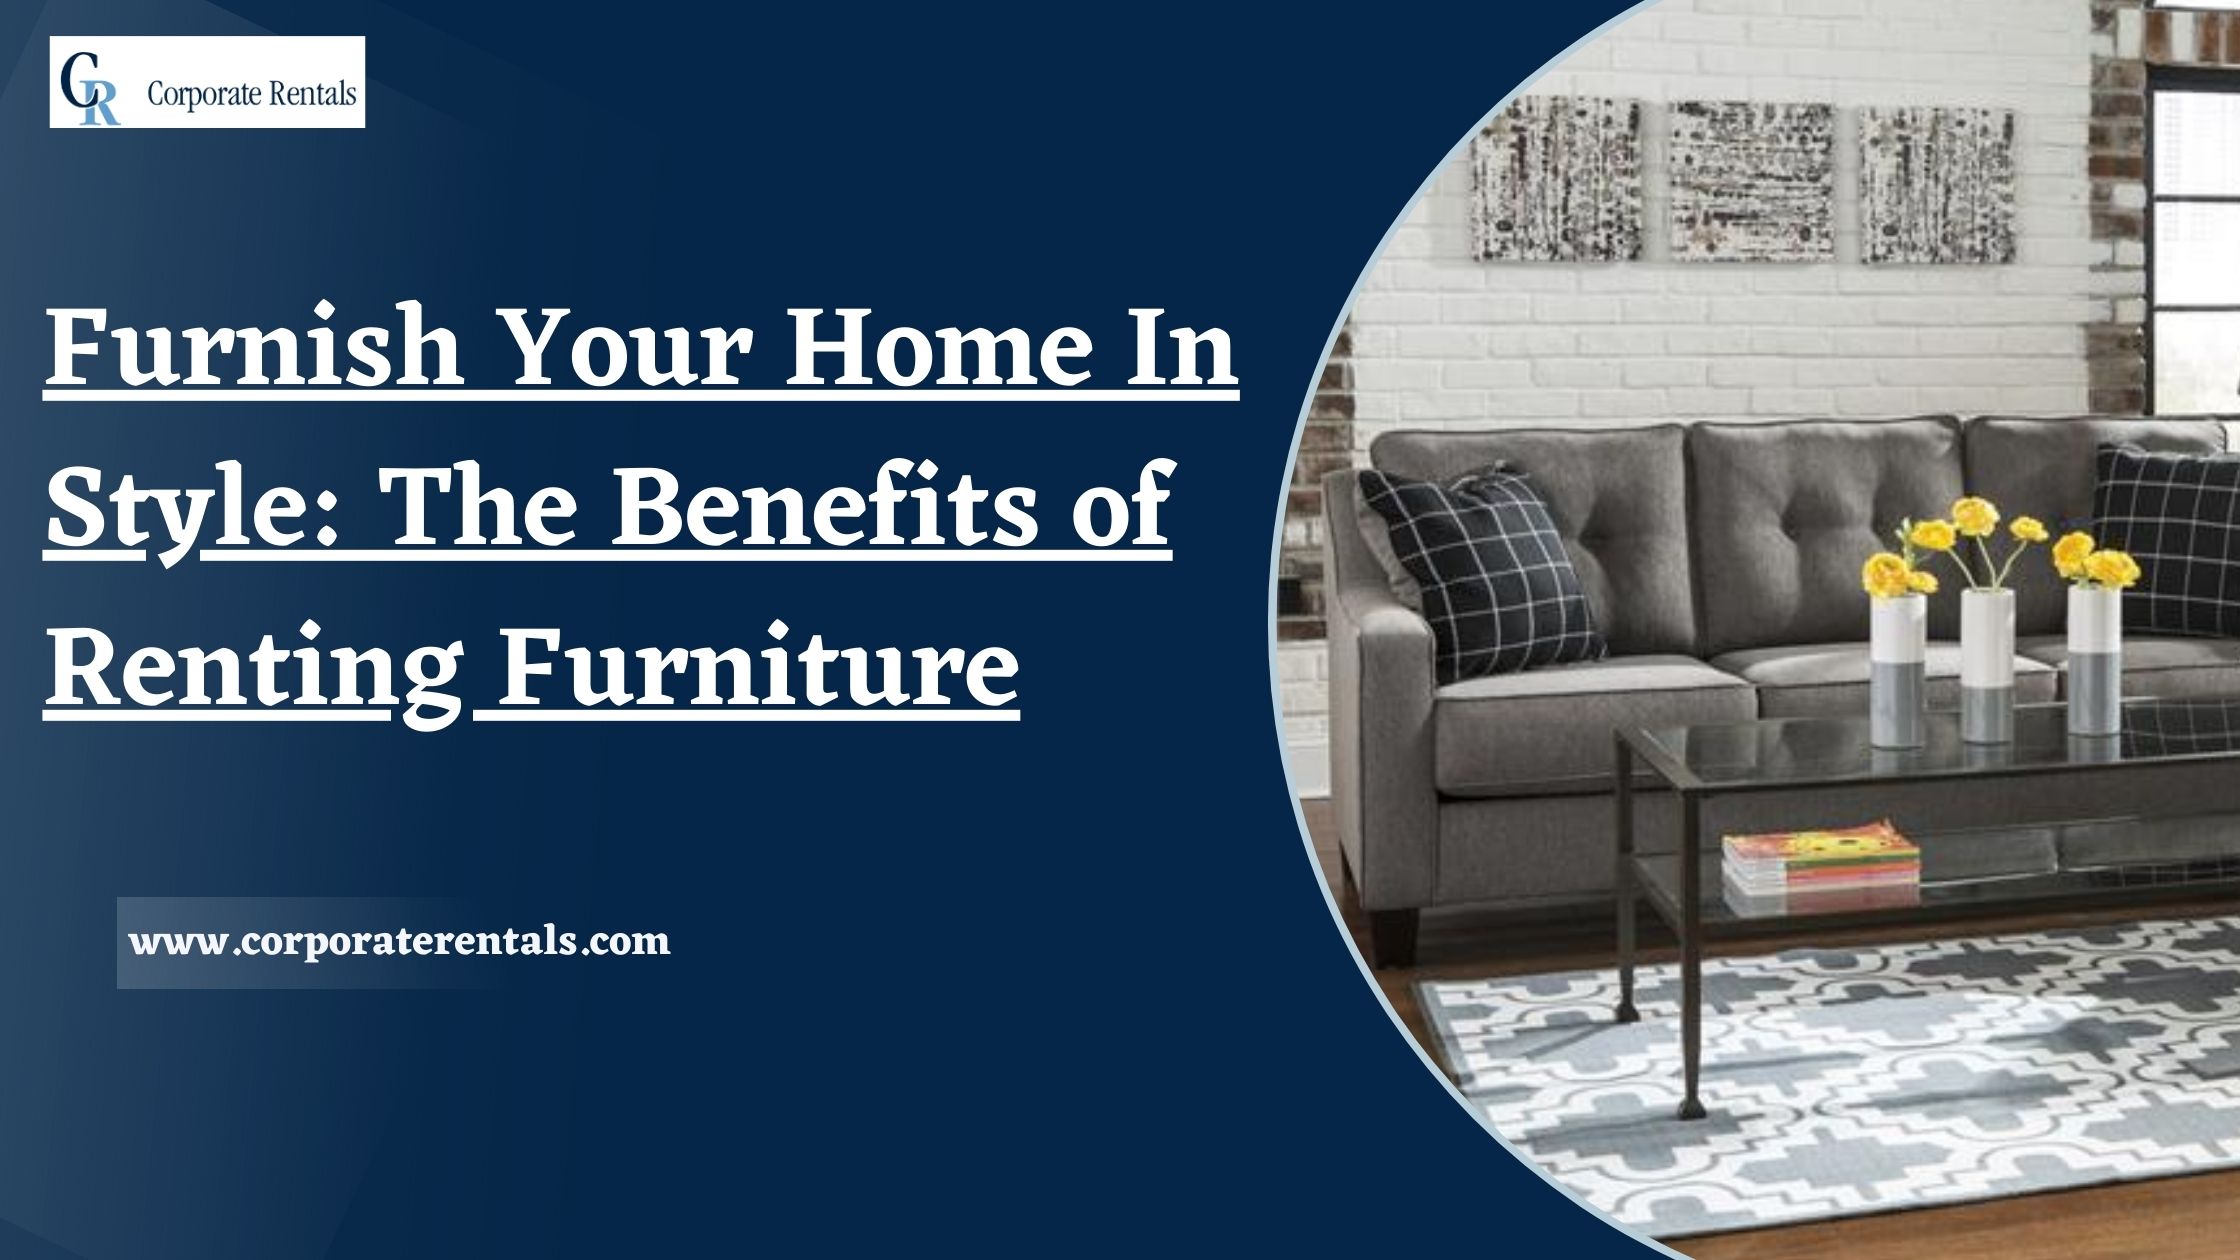 Furnish Your Home In Style: The Benefits Of Furniture Rental